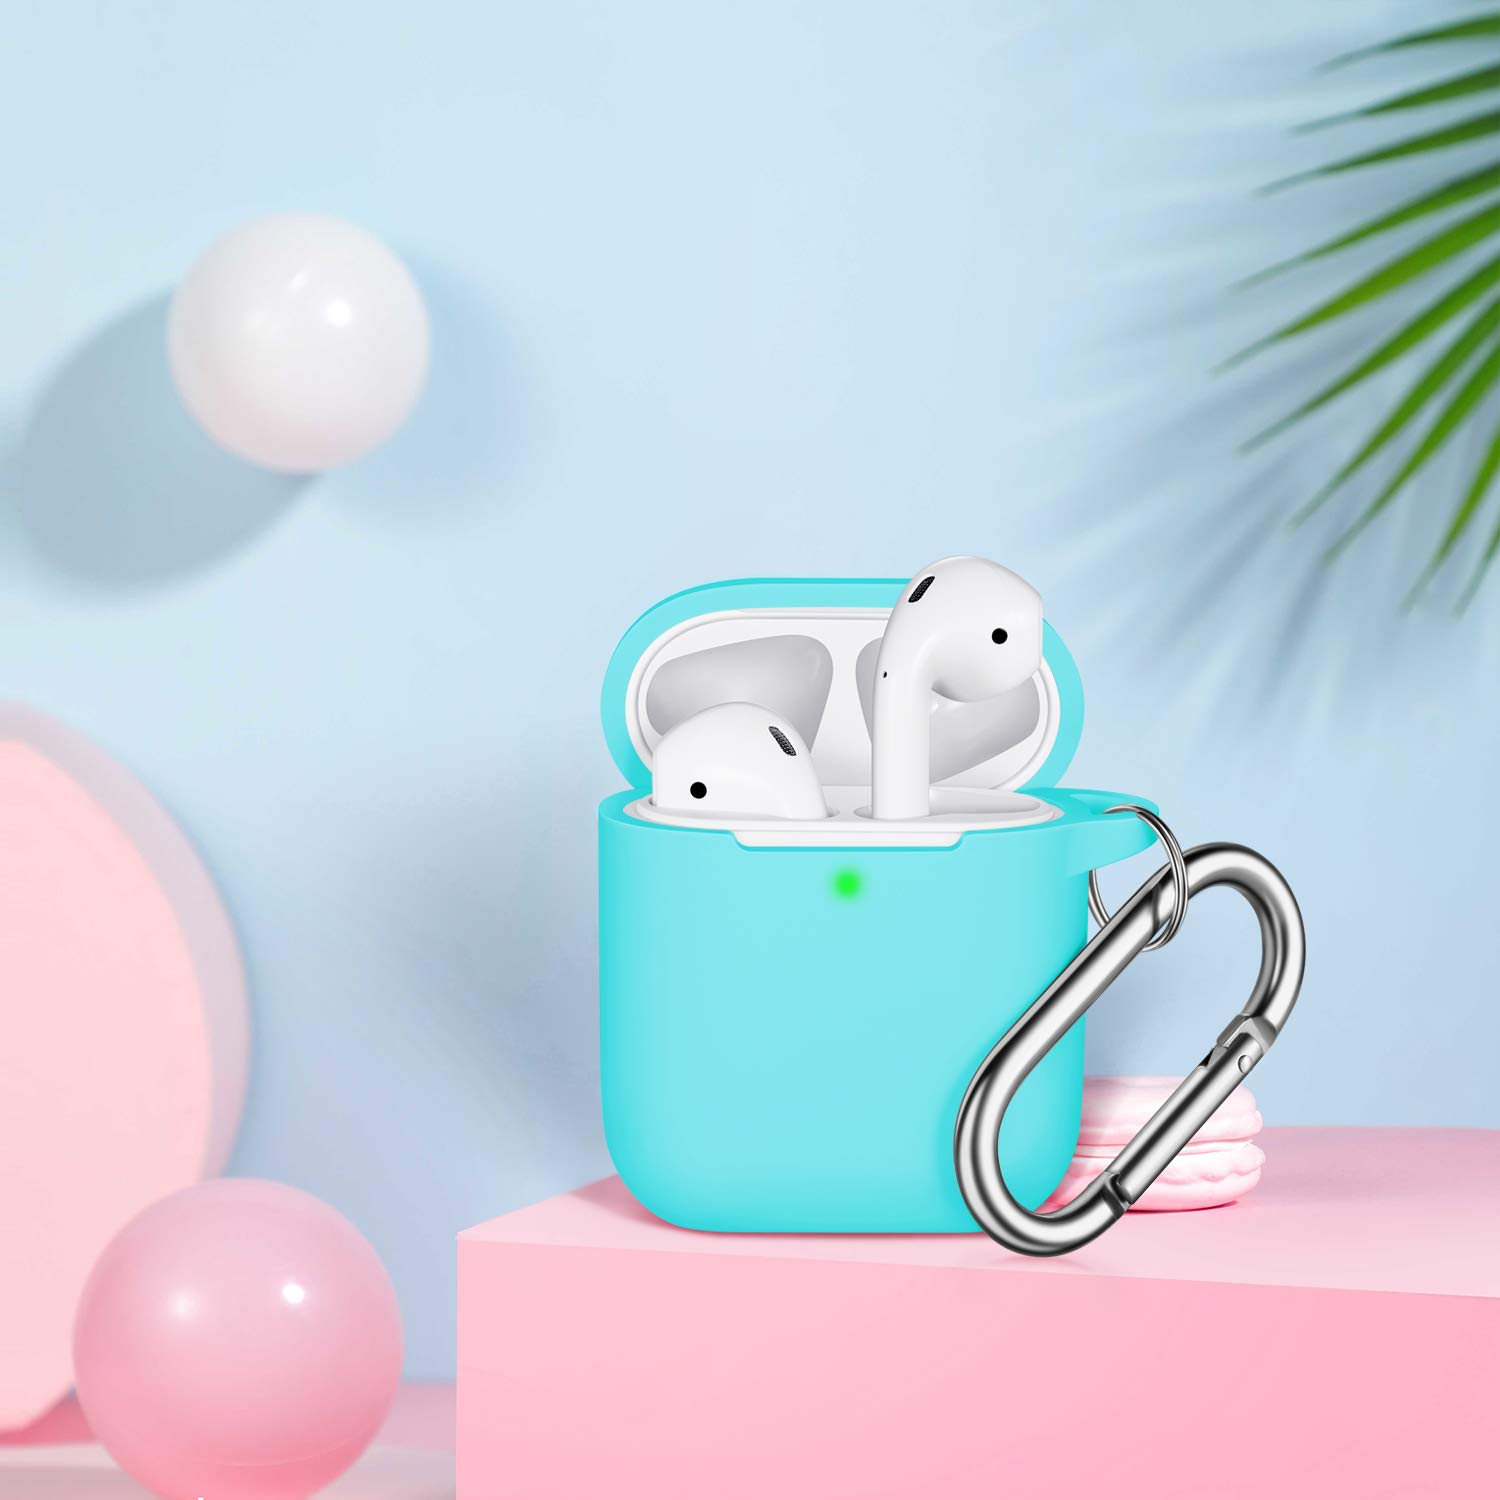 R-fun AirPods Case Cover, Soft Silicone Protective Cover with Keychain for Women Men Compatible with Apple AirPods 2nd 1st Generation Charging Case, Front LED Visible-Mint Green